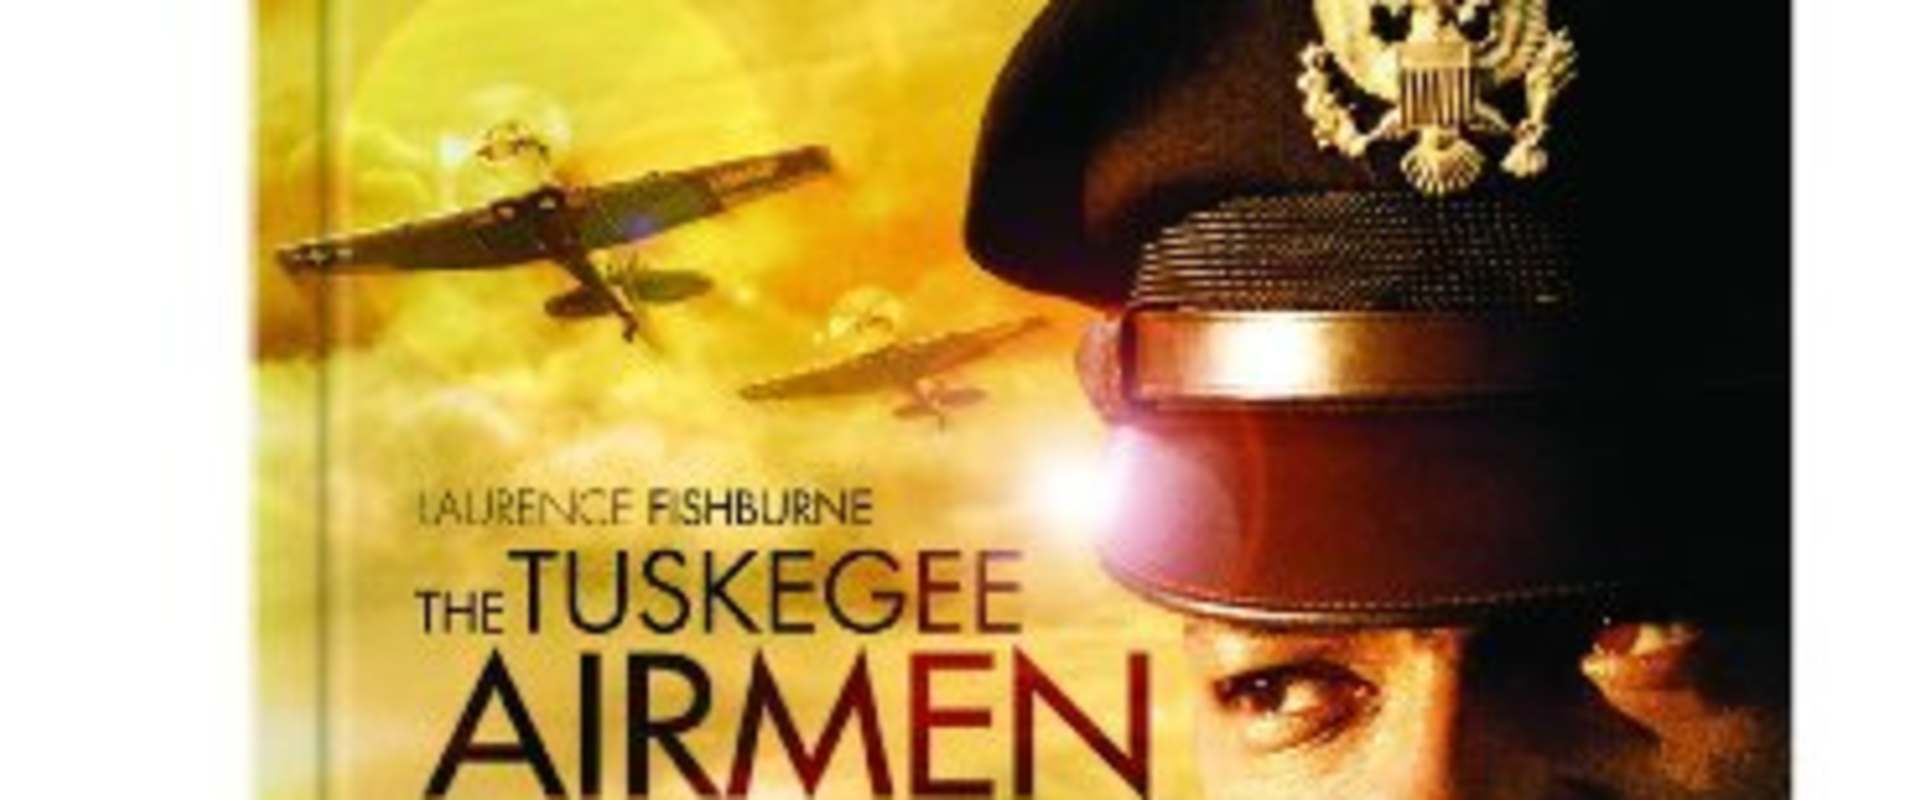 The Tuskegee Airmen background 1